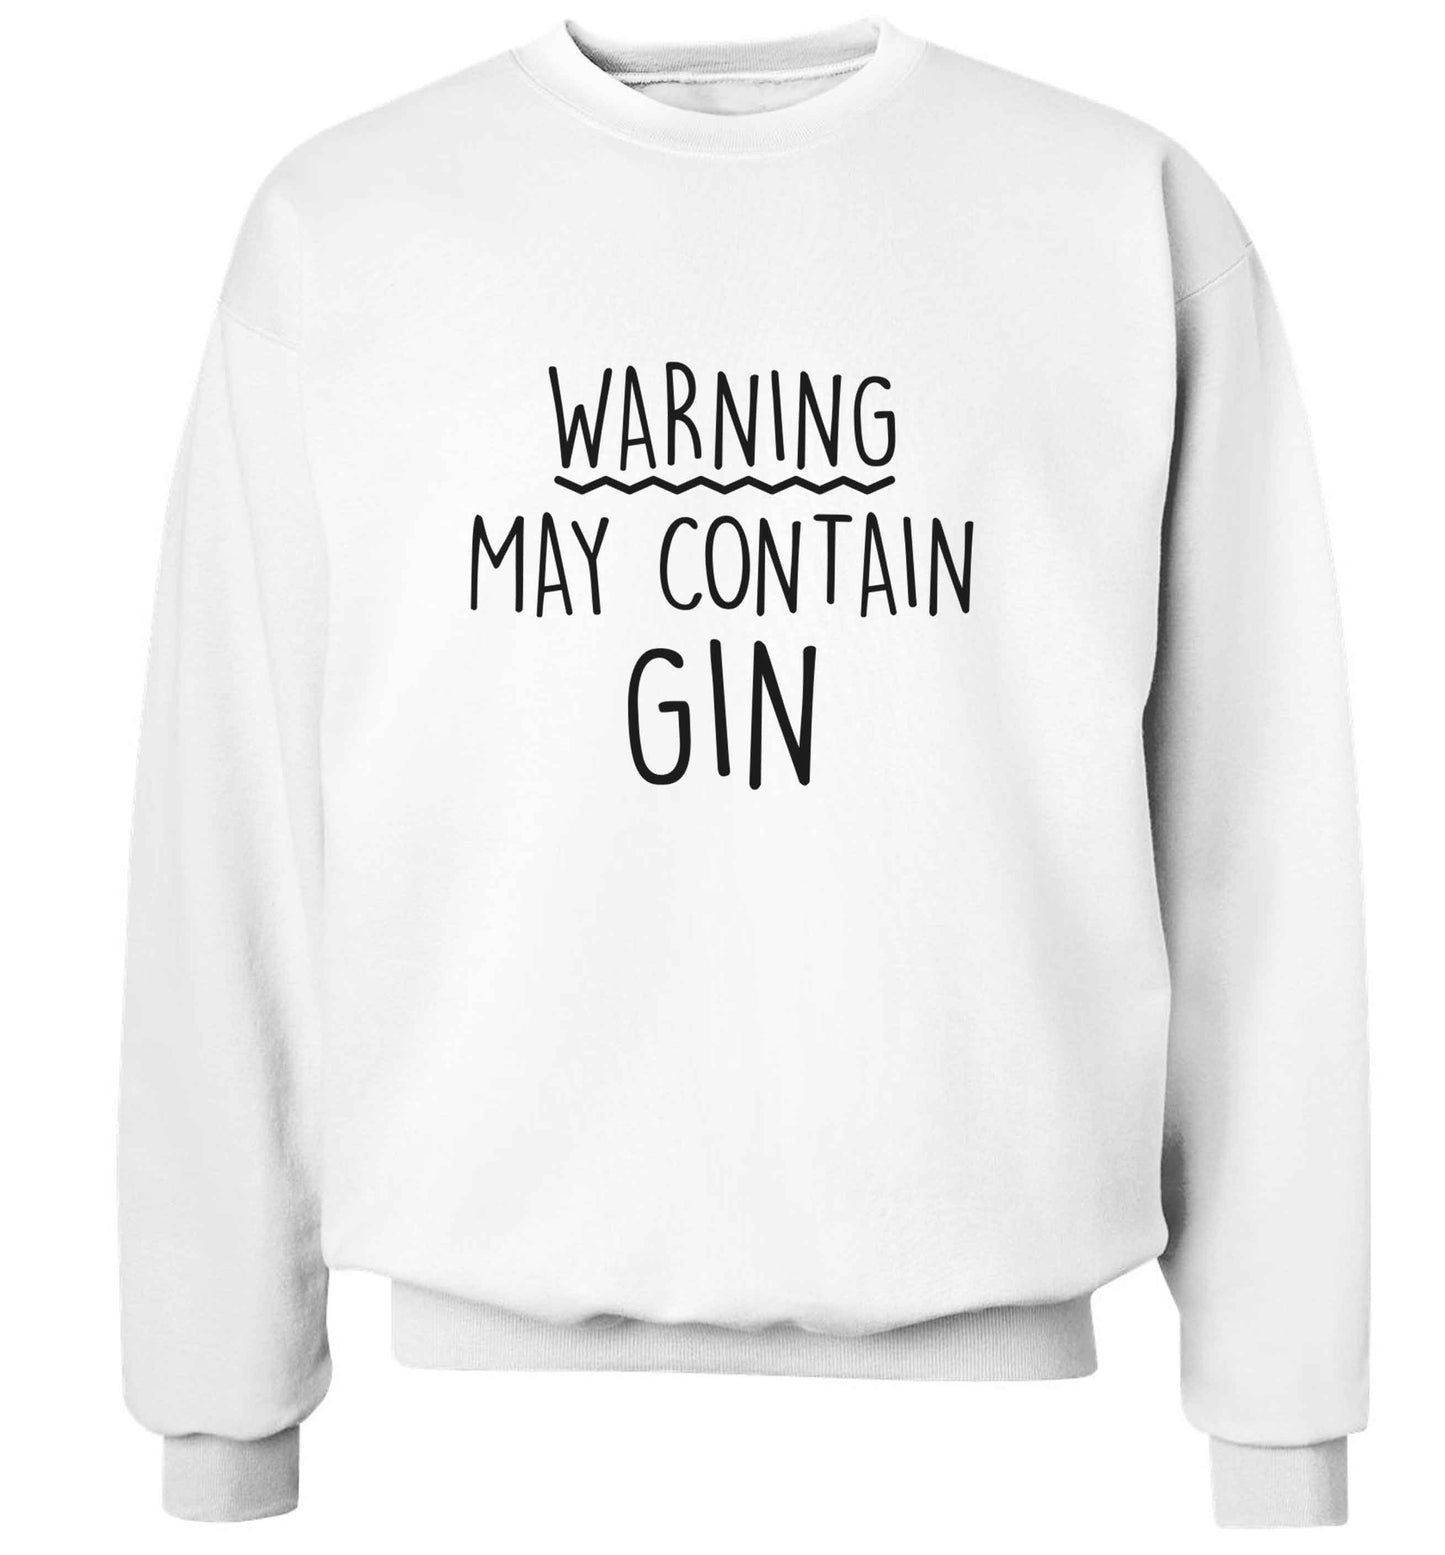 Warning may contain gin adult's unisex white sweater 2XL